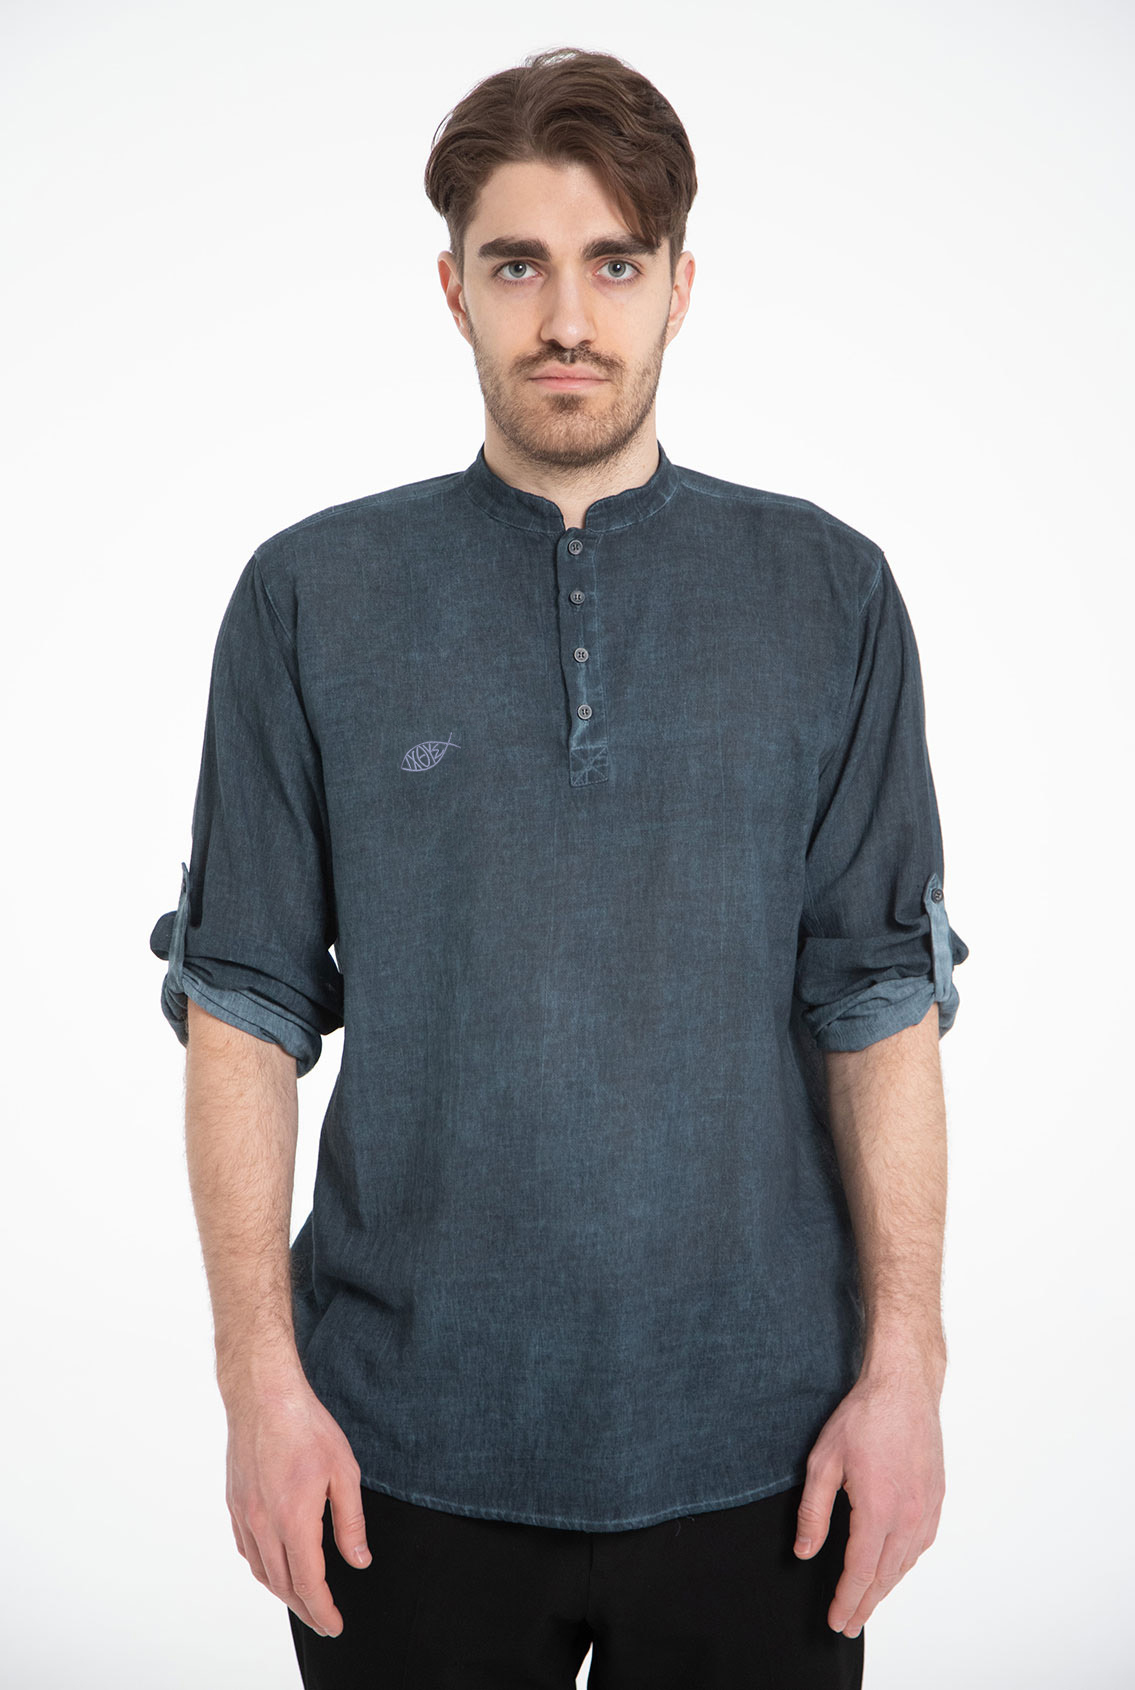 Men's shirt with short sleeves